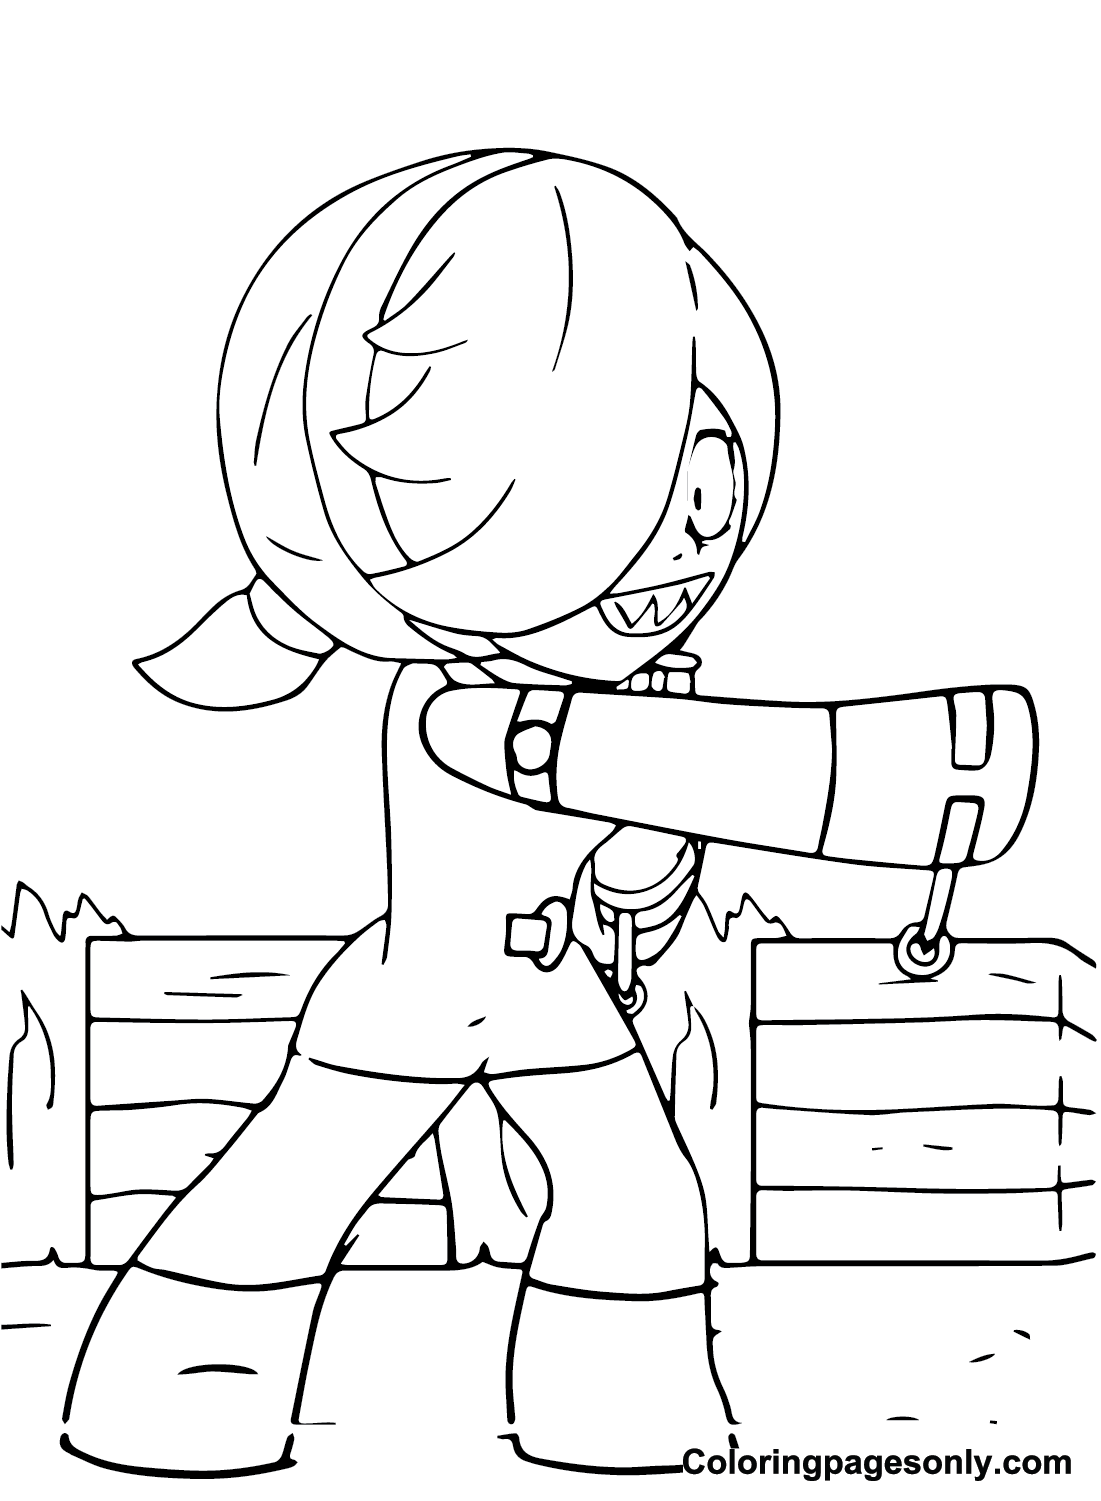 Colette from Brawl Stars Coloring Page